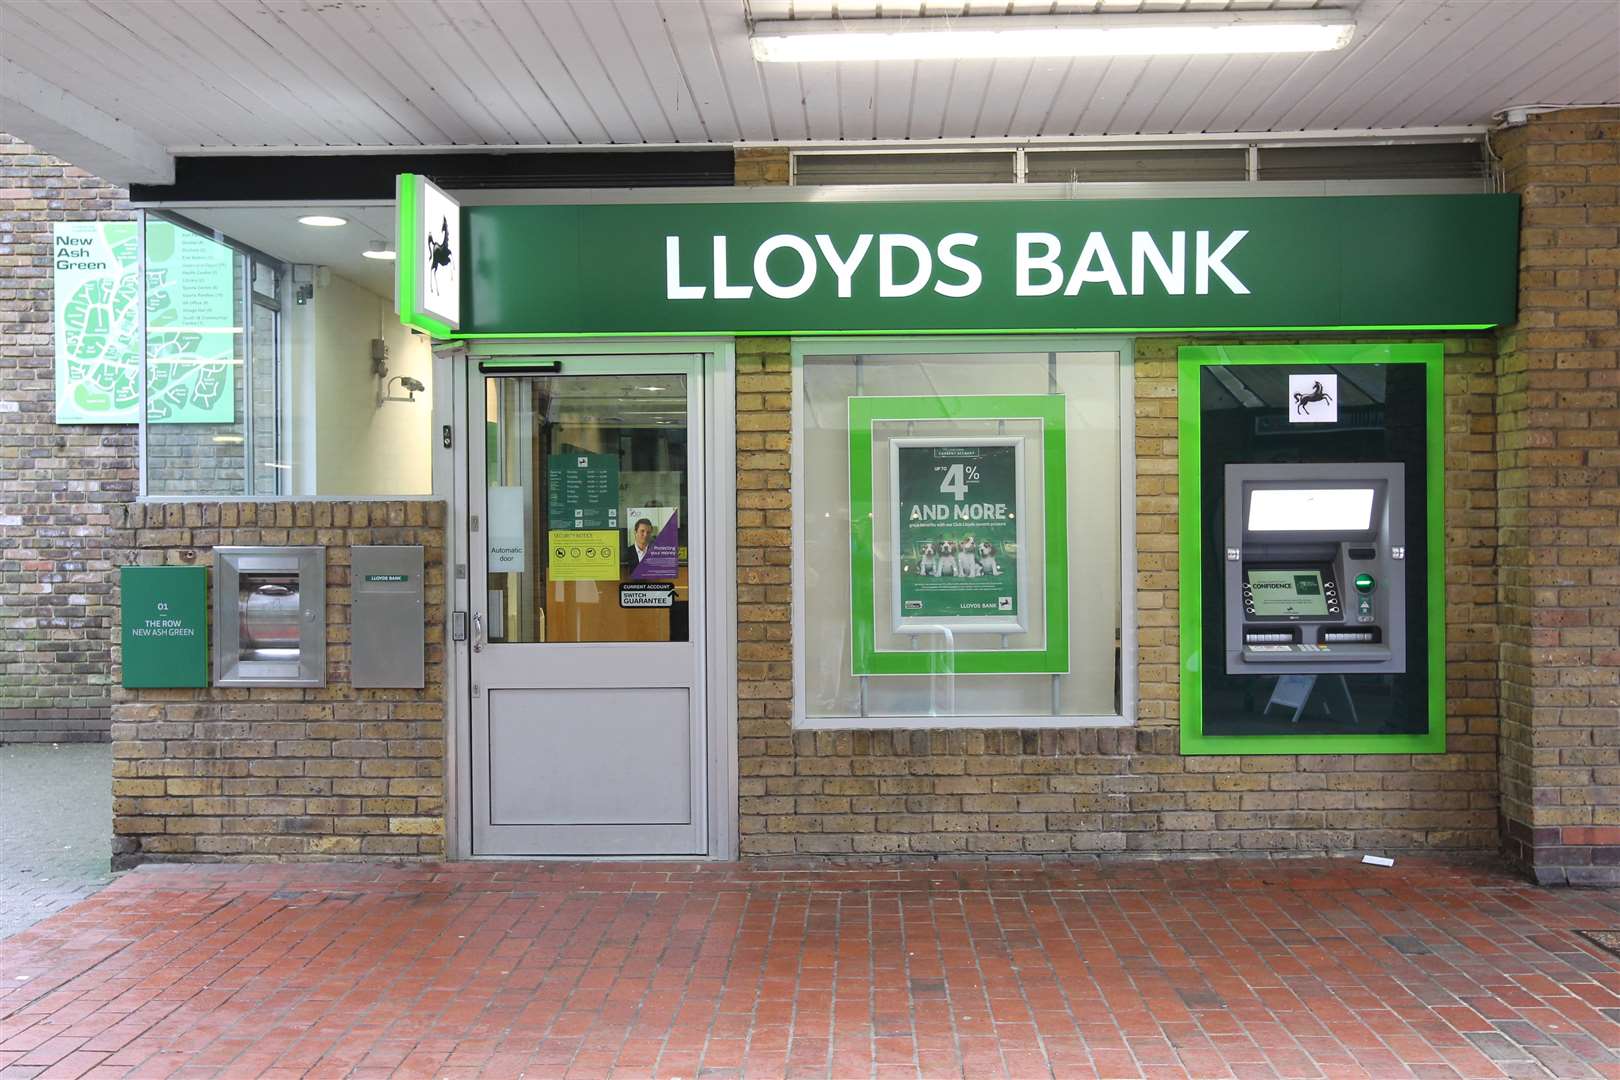 The Lloyds Bank branch in New Ash Green is to close